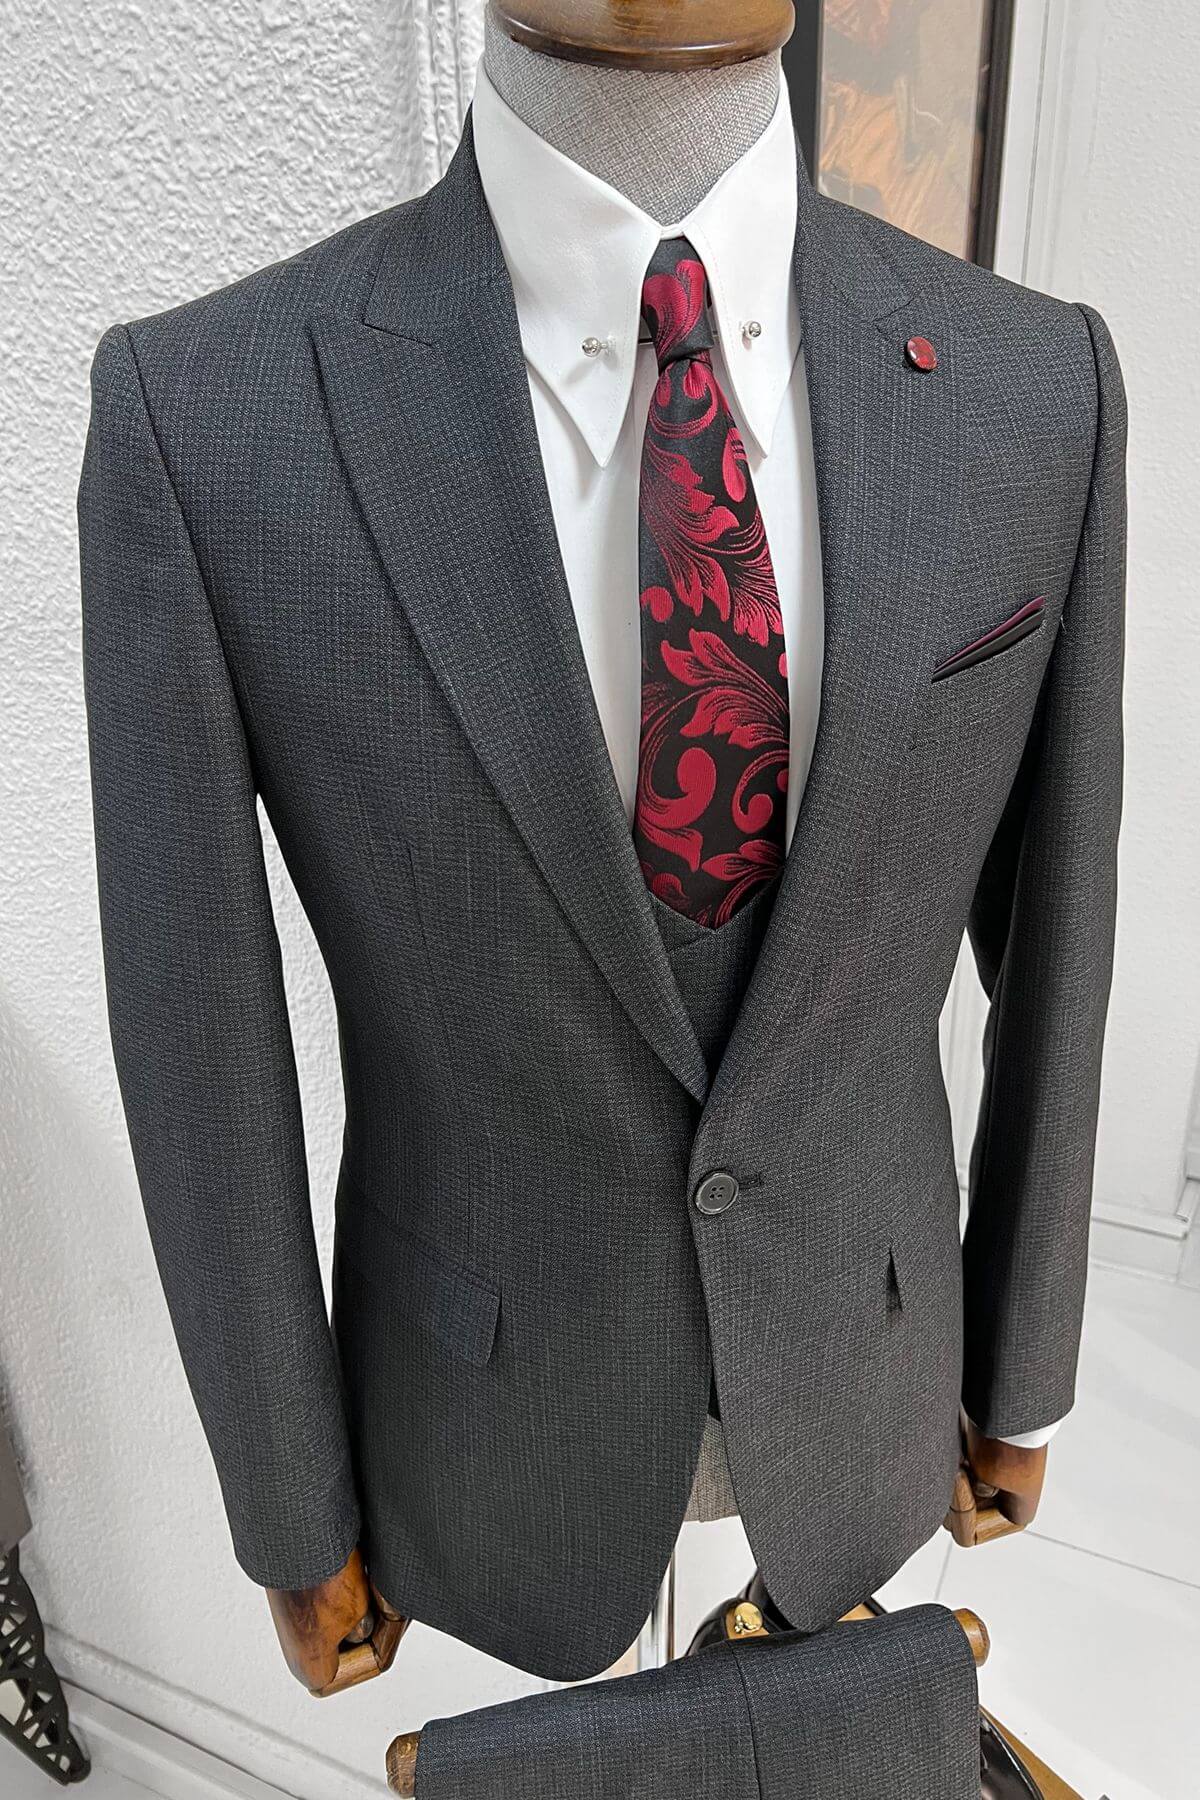 A Patterned Slim-fit Anthracite Wool Suit on display